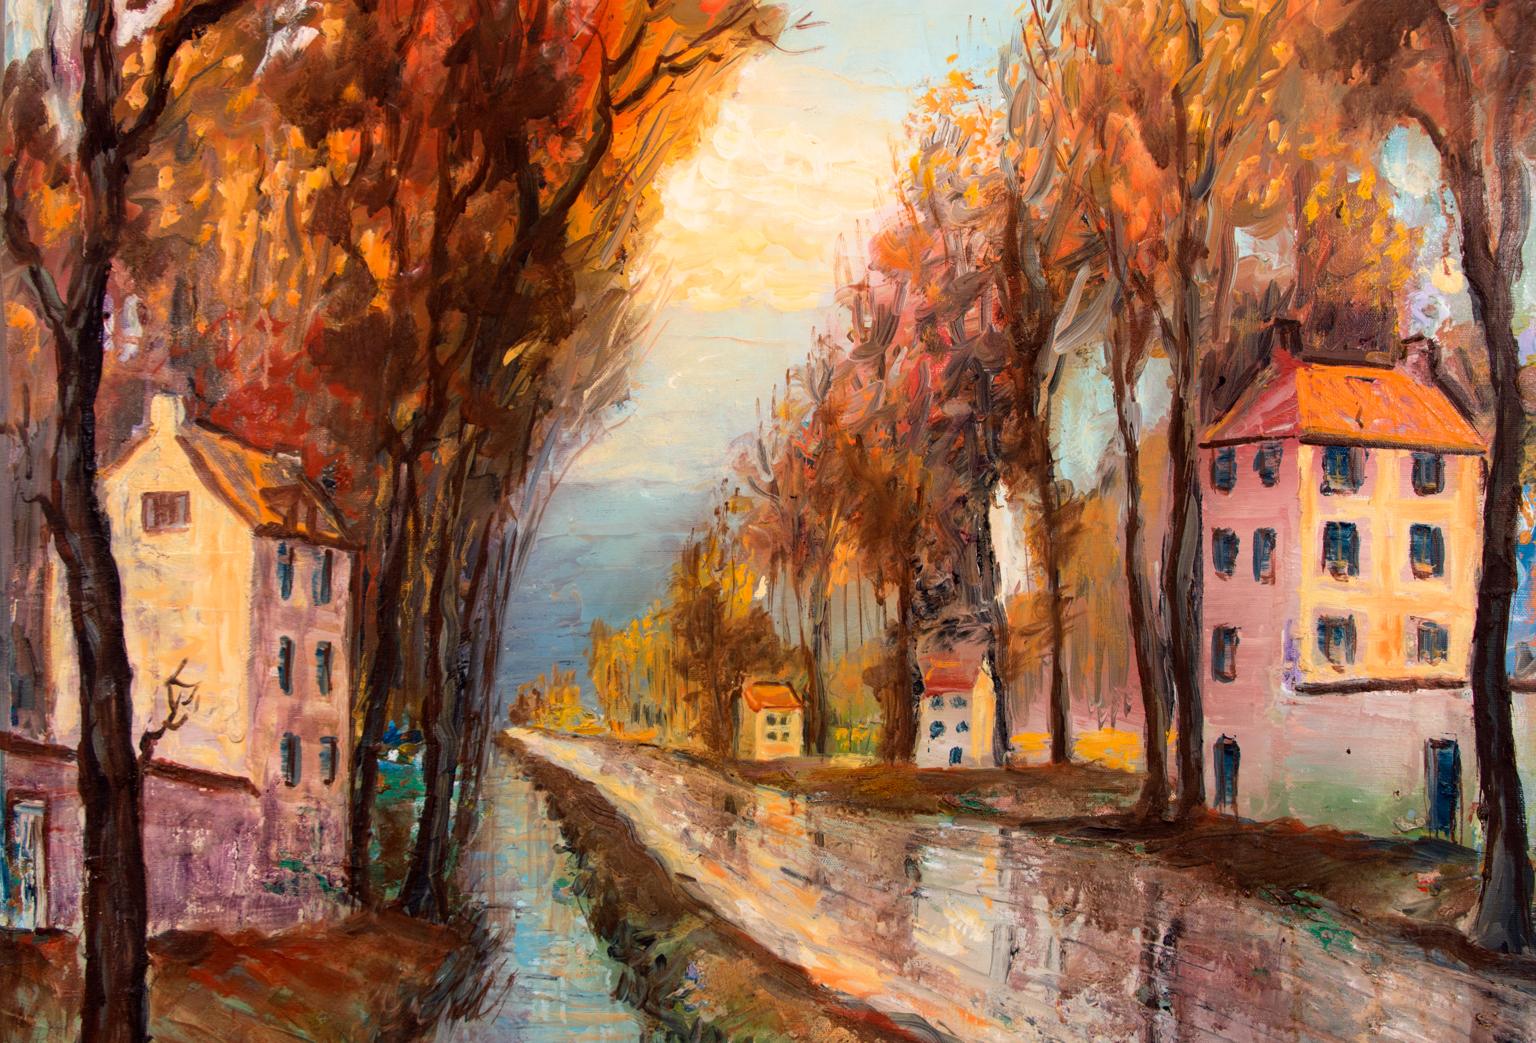 Untitled Landscape, an original oil on canvas by Roger Etienne, is a piece for the true collector. Etienne's brush strokes evoke vivid memories of a French countryside with a fantastic landscape full of color. Both Etienne's technical talent and his